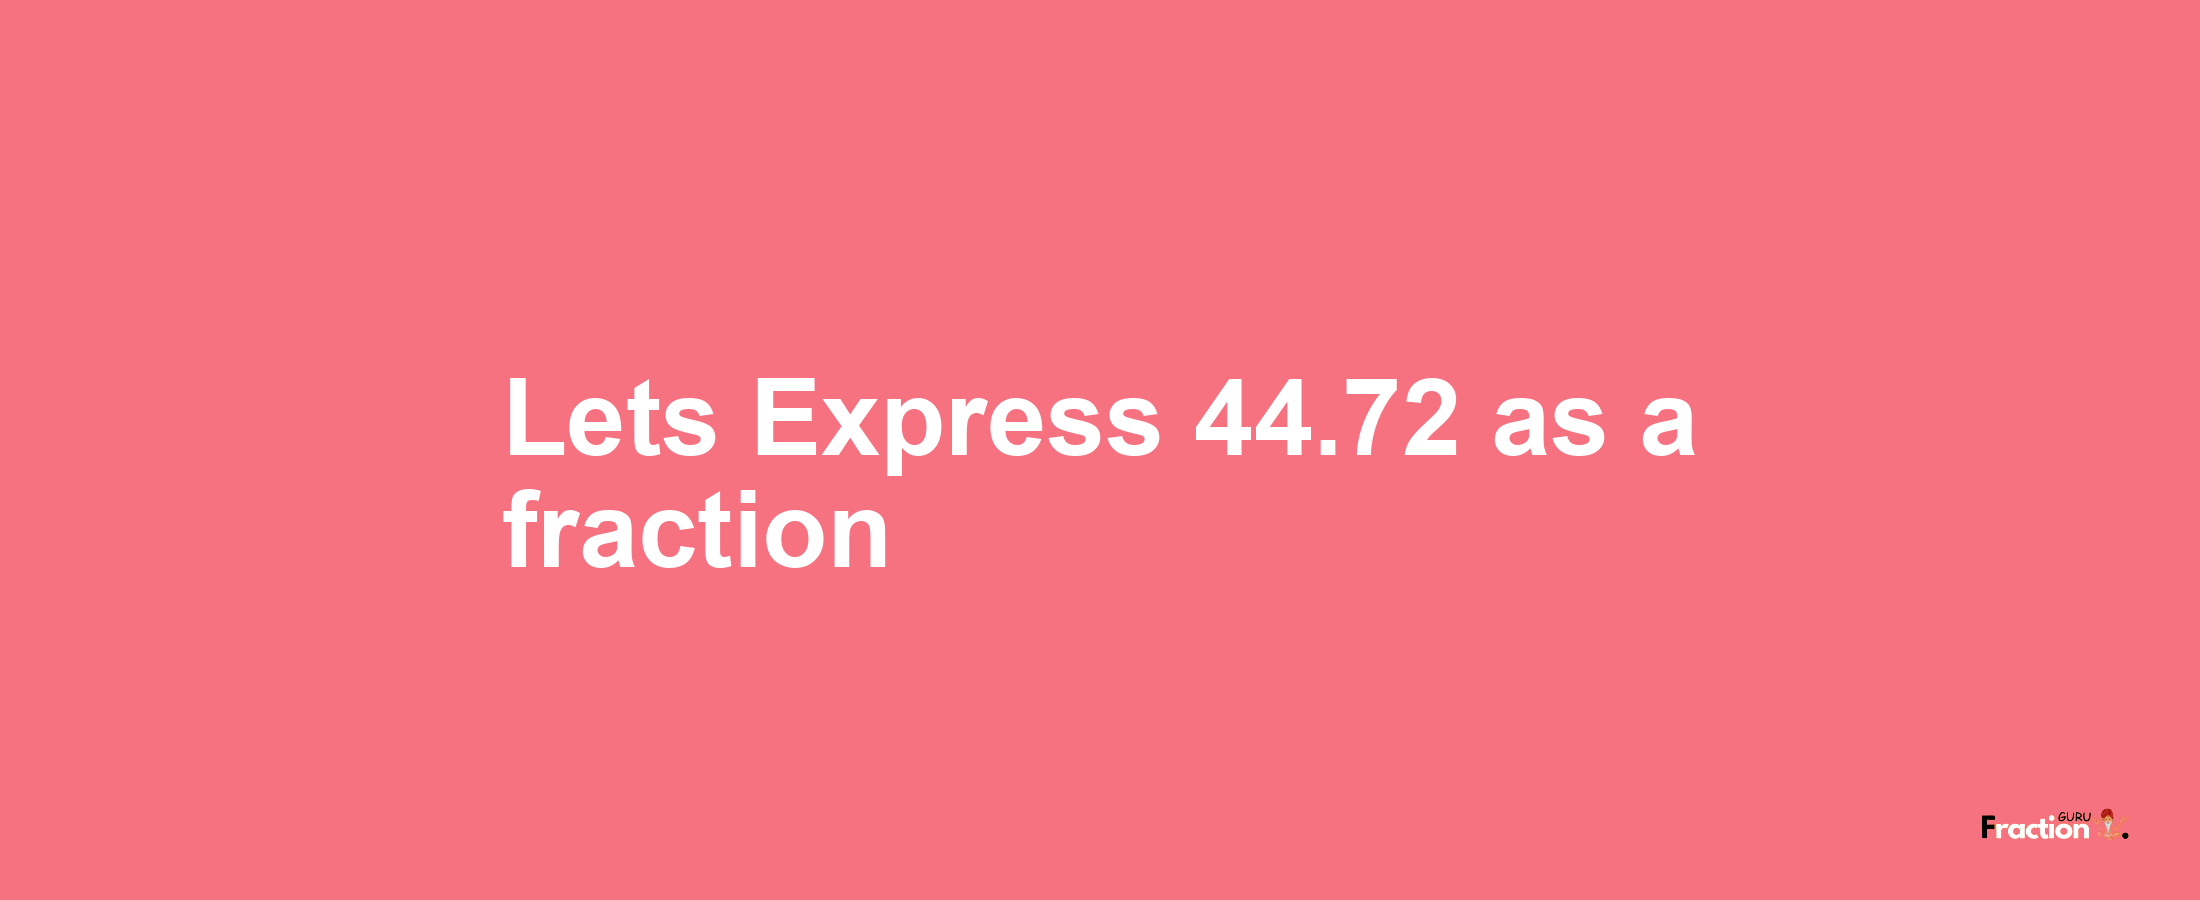 Lets Express 44.72 as afraction